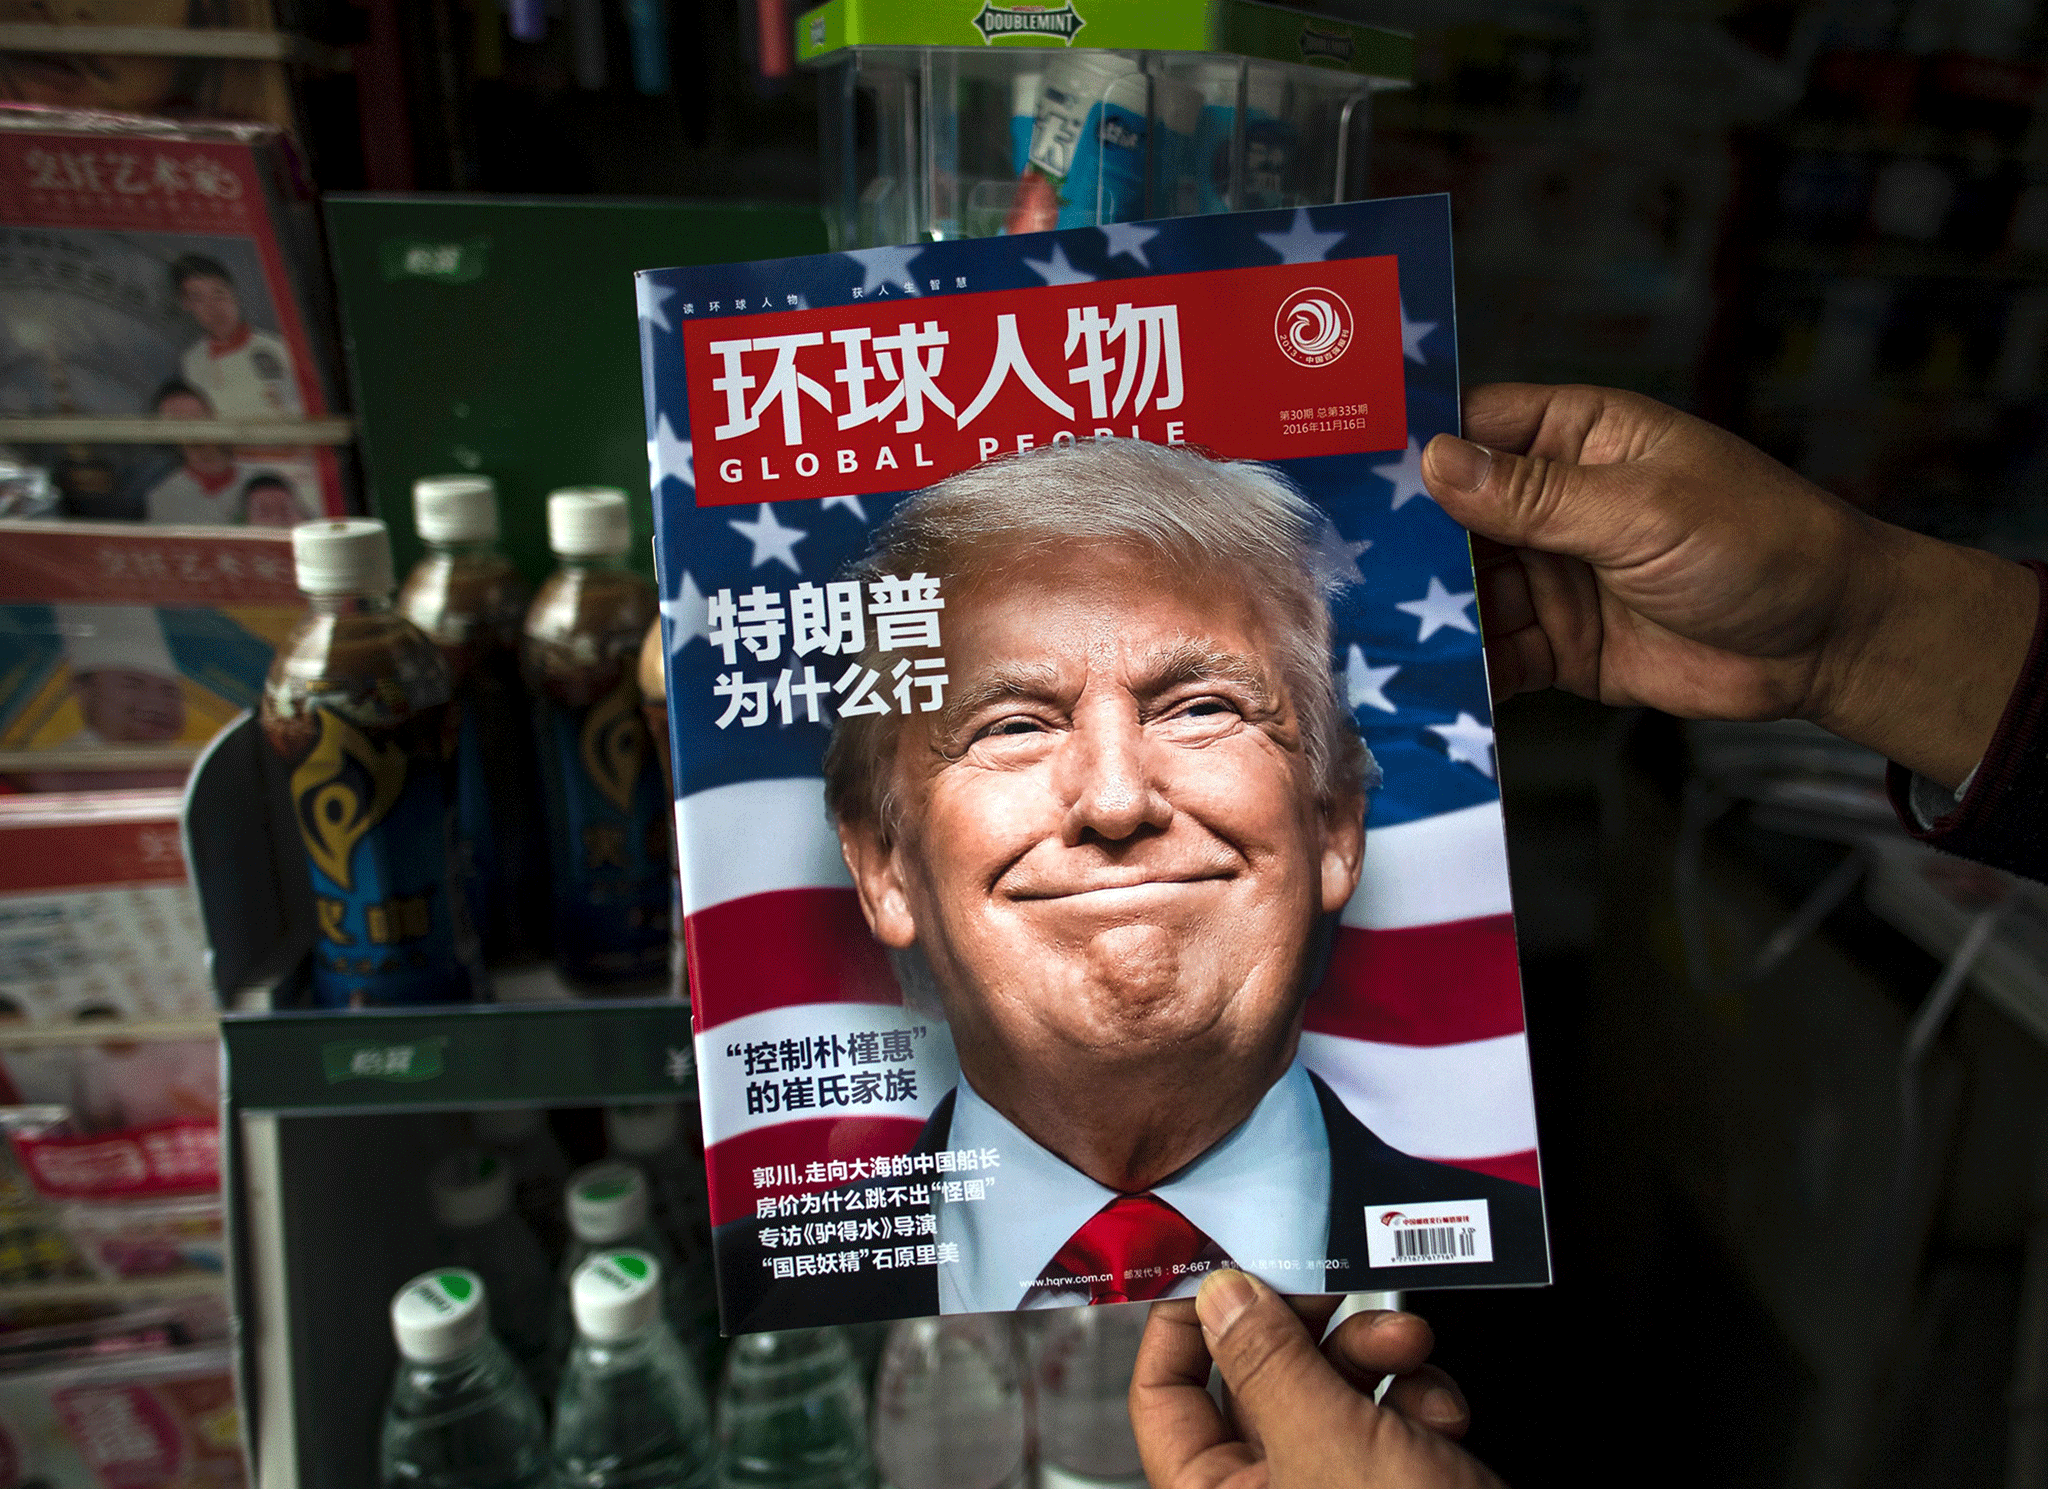 A copy of the local Chinese magazine Global People with a cover story that translates to 'Why did Trump win?'